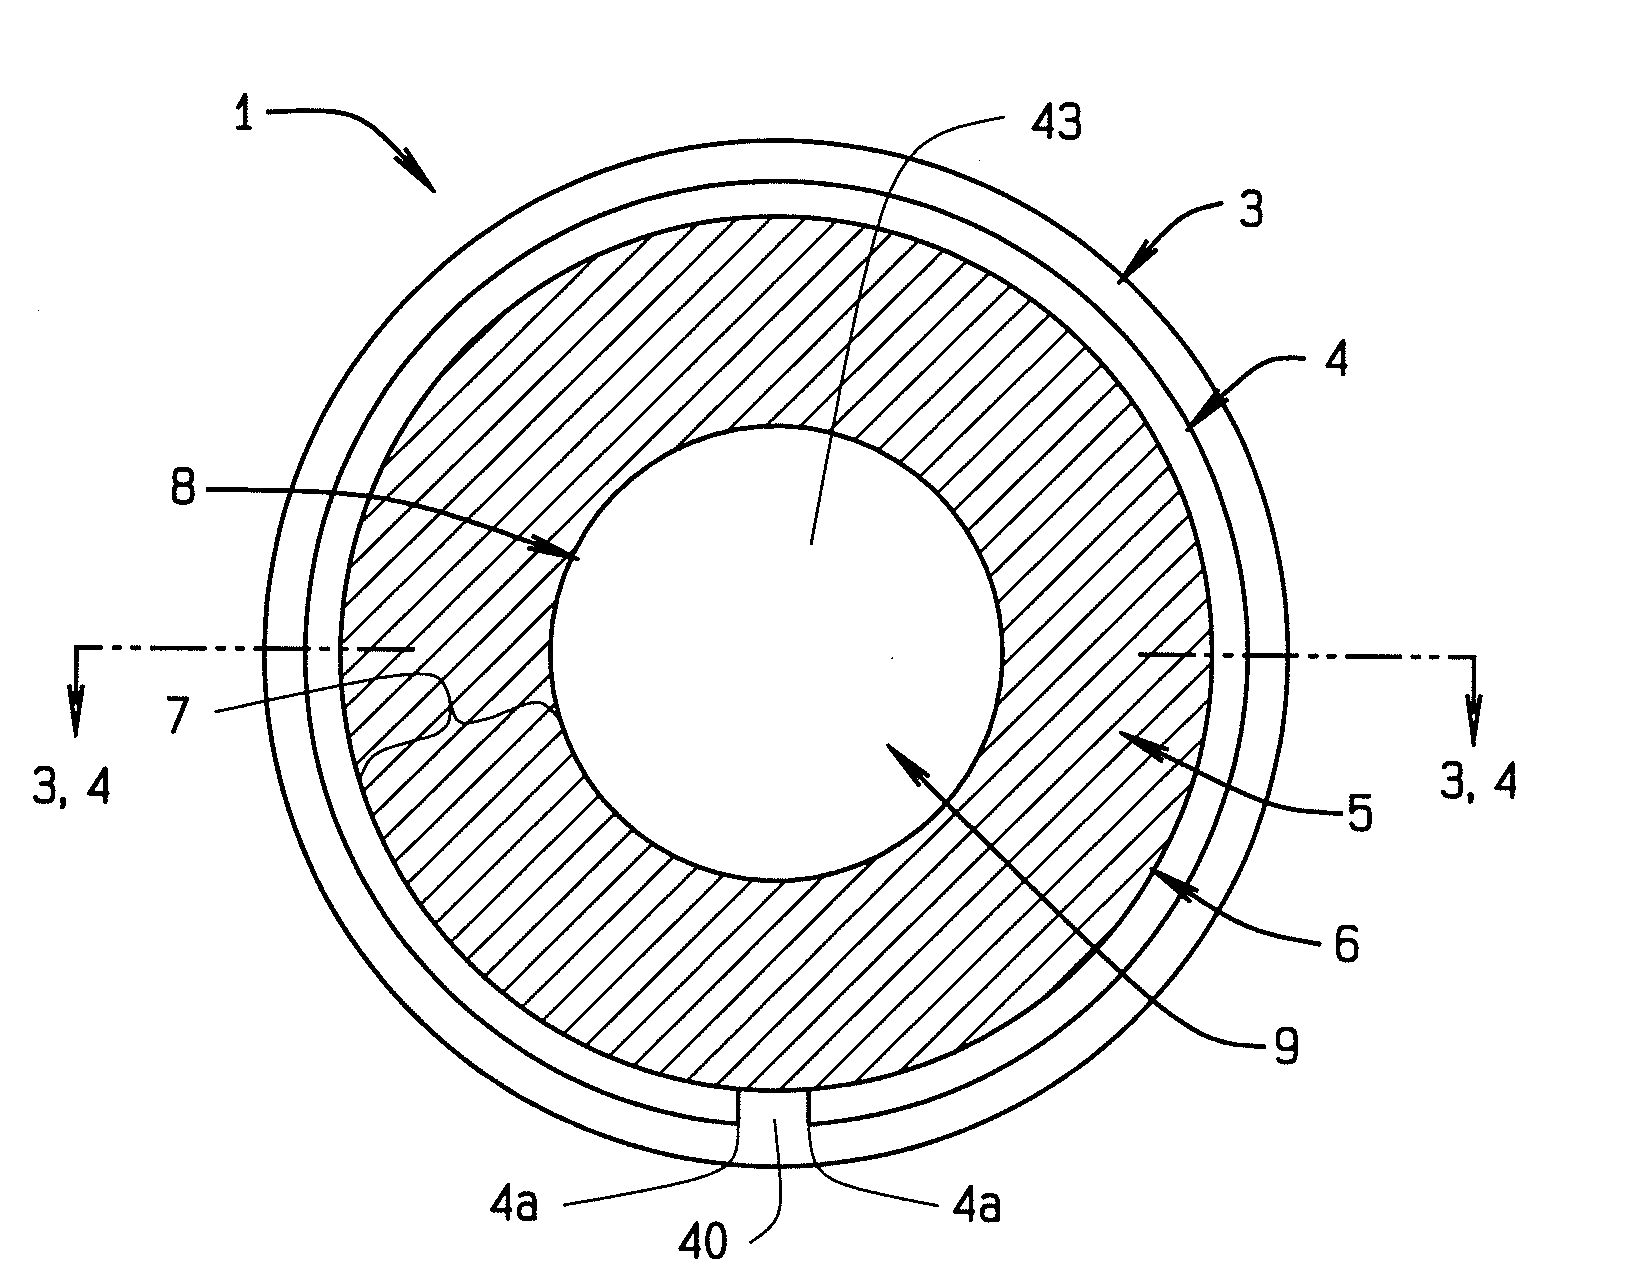 Dynamic multifocal contact lens